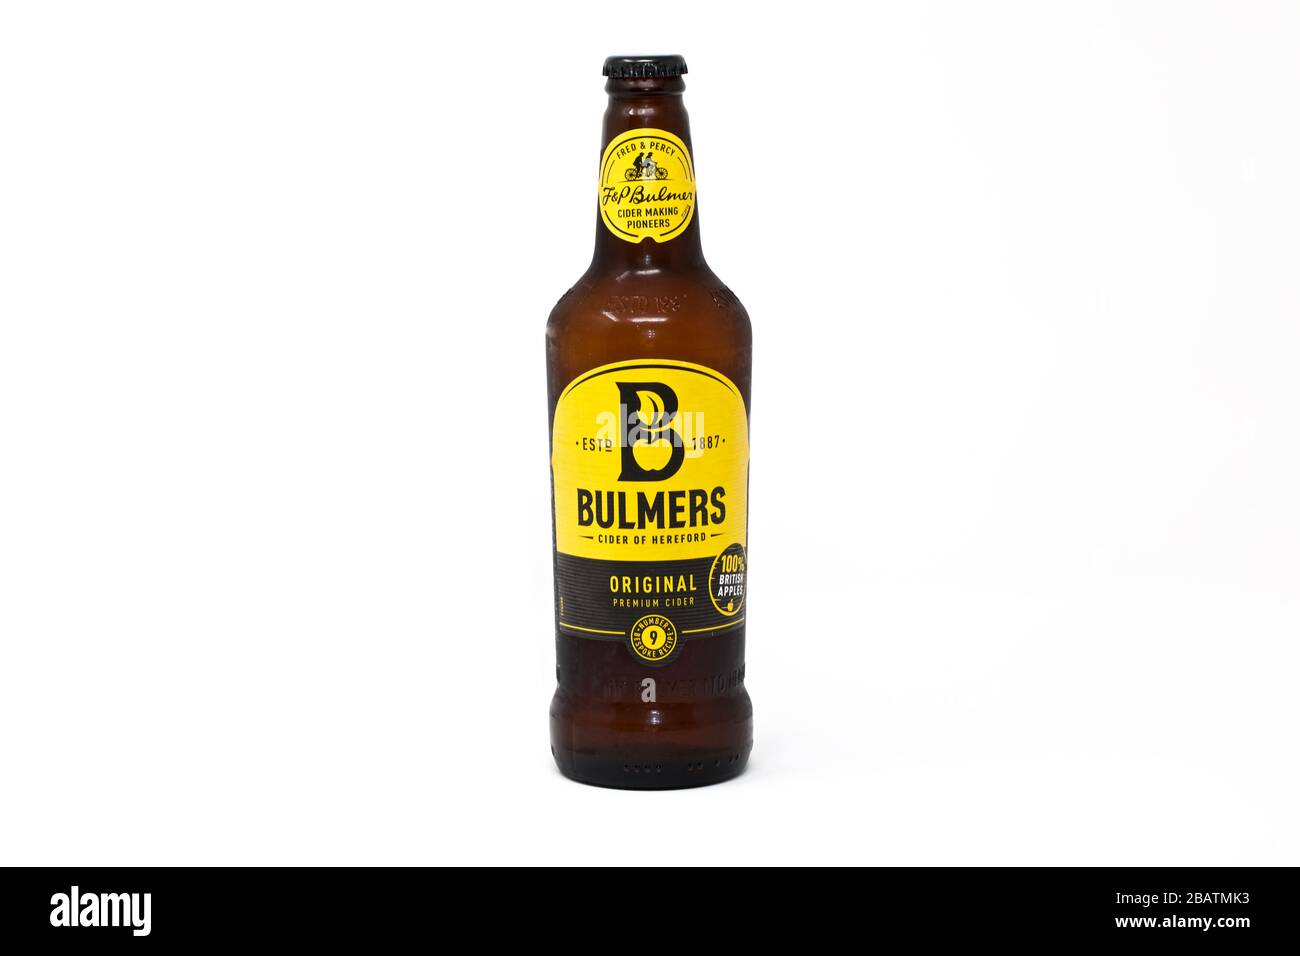 Bottle of Bulmers Original Cider on a white background Stock Photo - Alamy